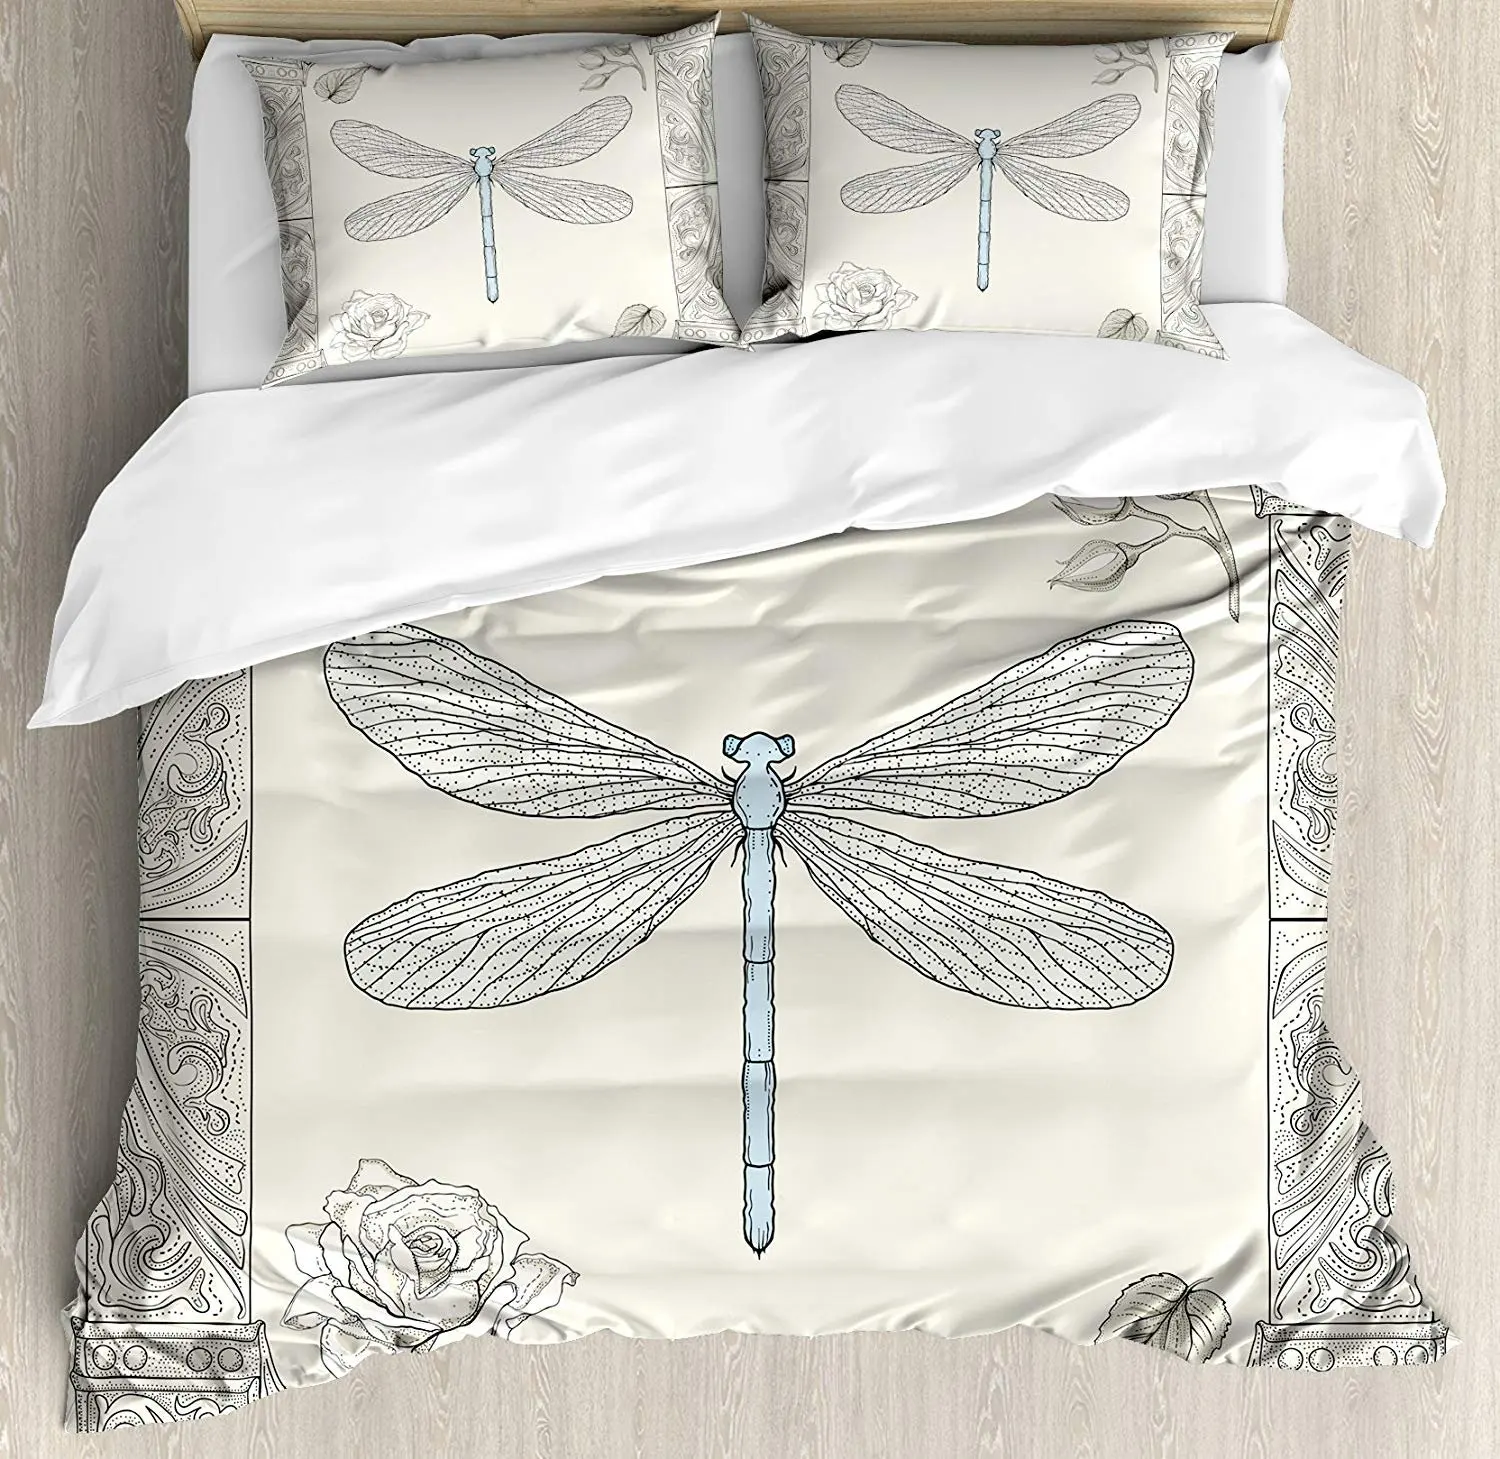 

Dragonfly Bedding Set Hand Drawn Royal Ancient Style Rose Petals Leaves and Ornate Figures Design Duvet Cover Pillowcase